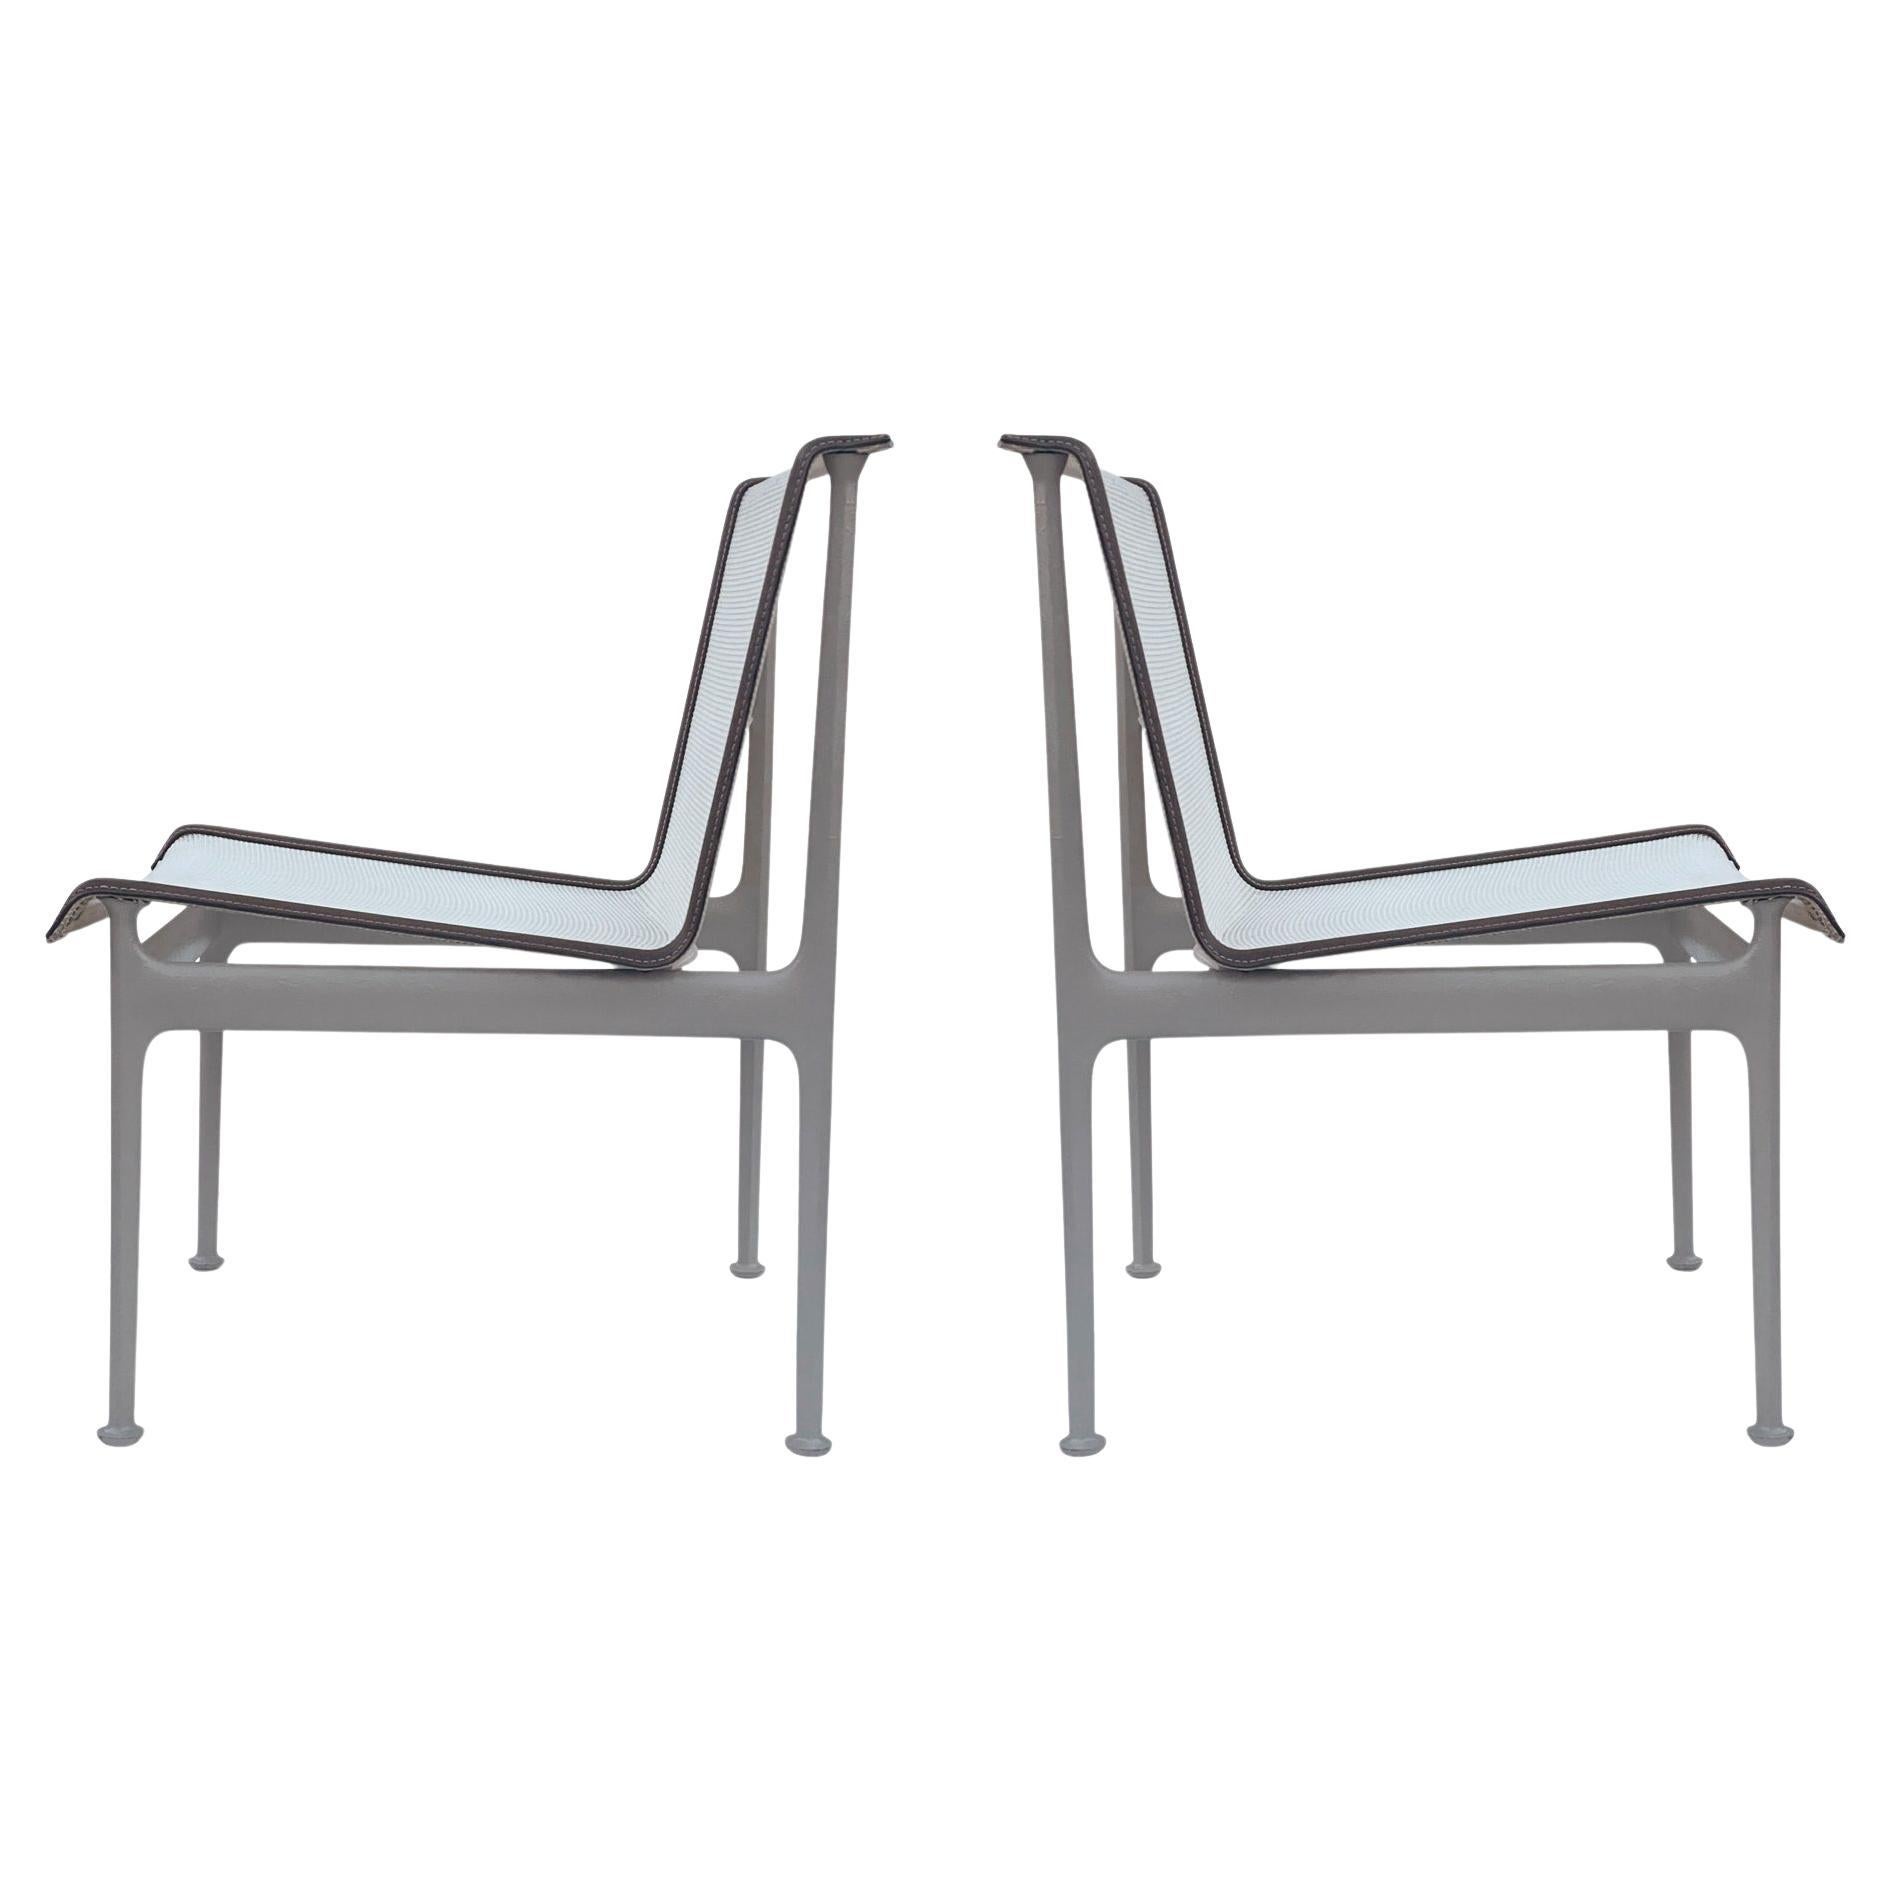 Mid-Century Modern Armless Patio Side Chairs or Lounge Chairs by Richard Schultz